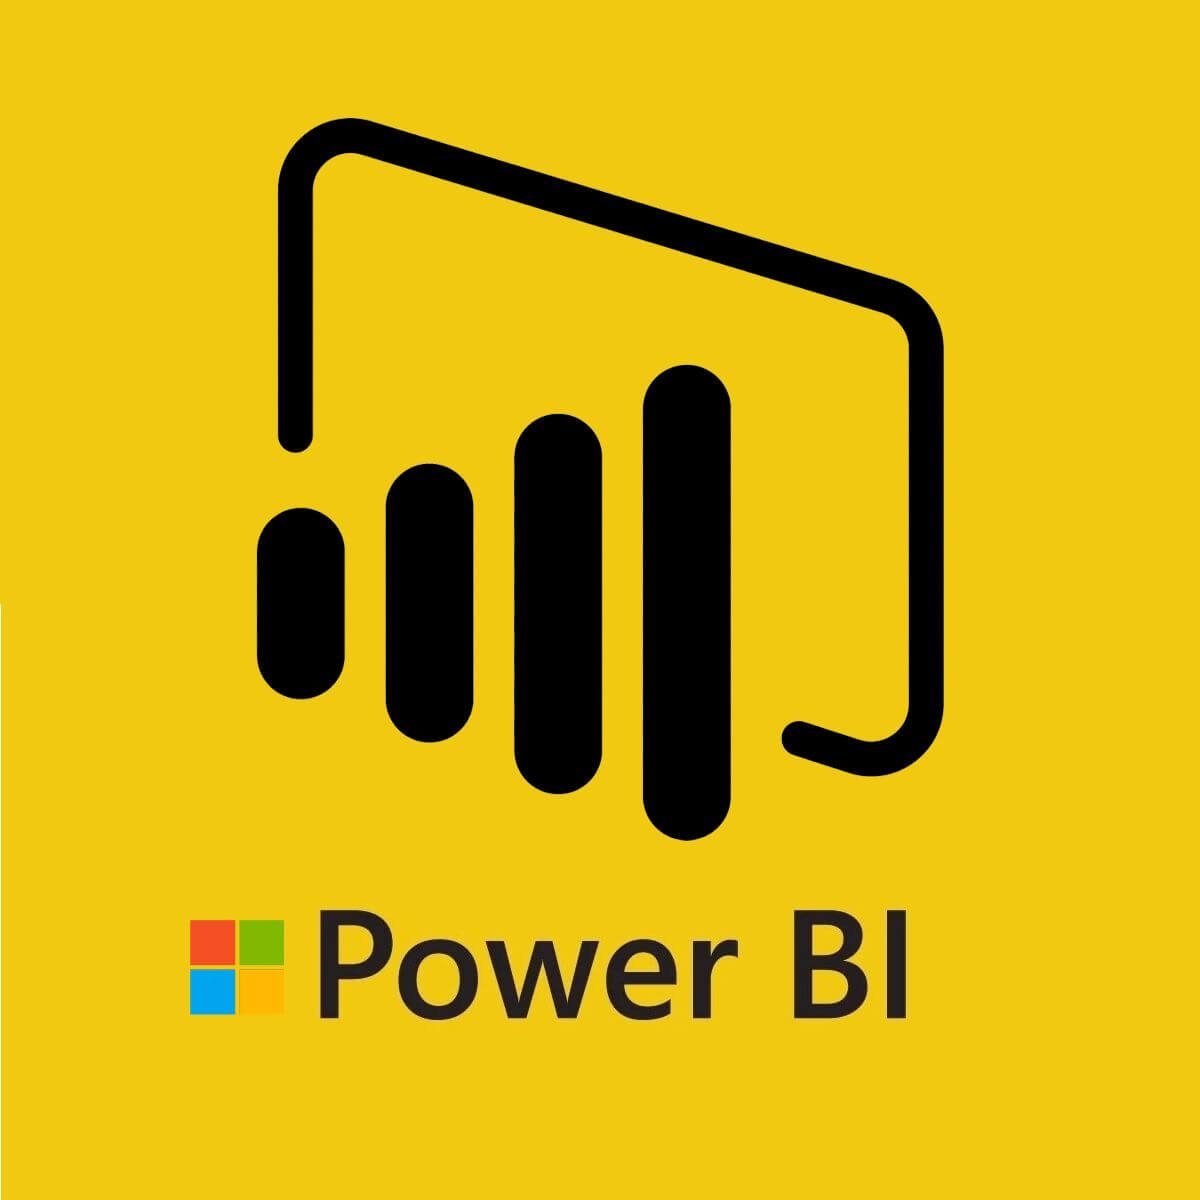 Can i use Power Bi for free? We answer!